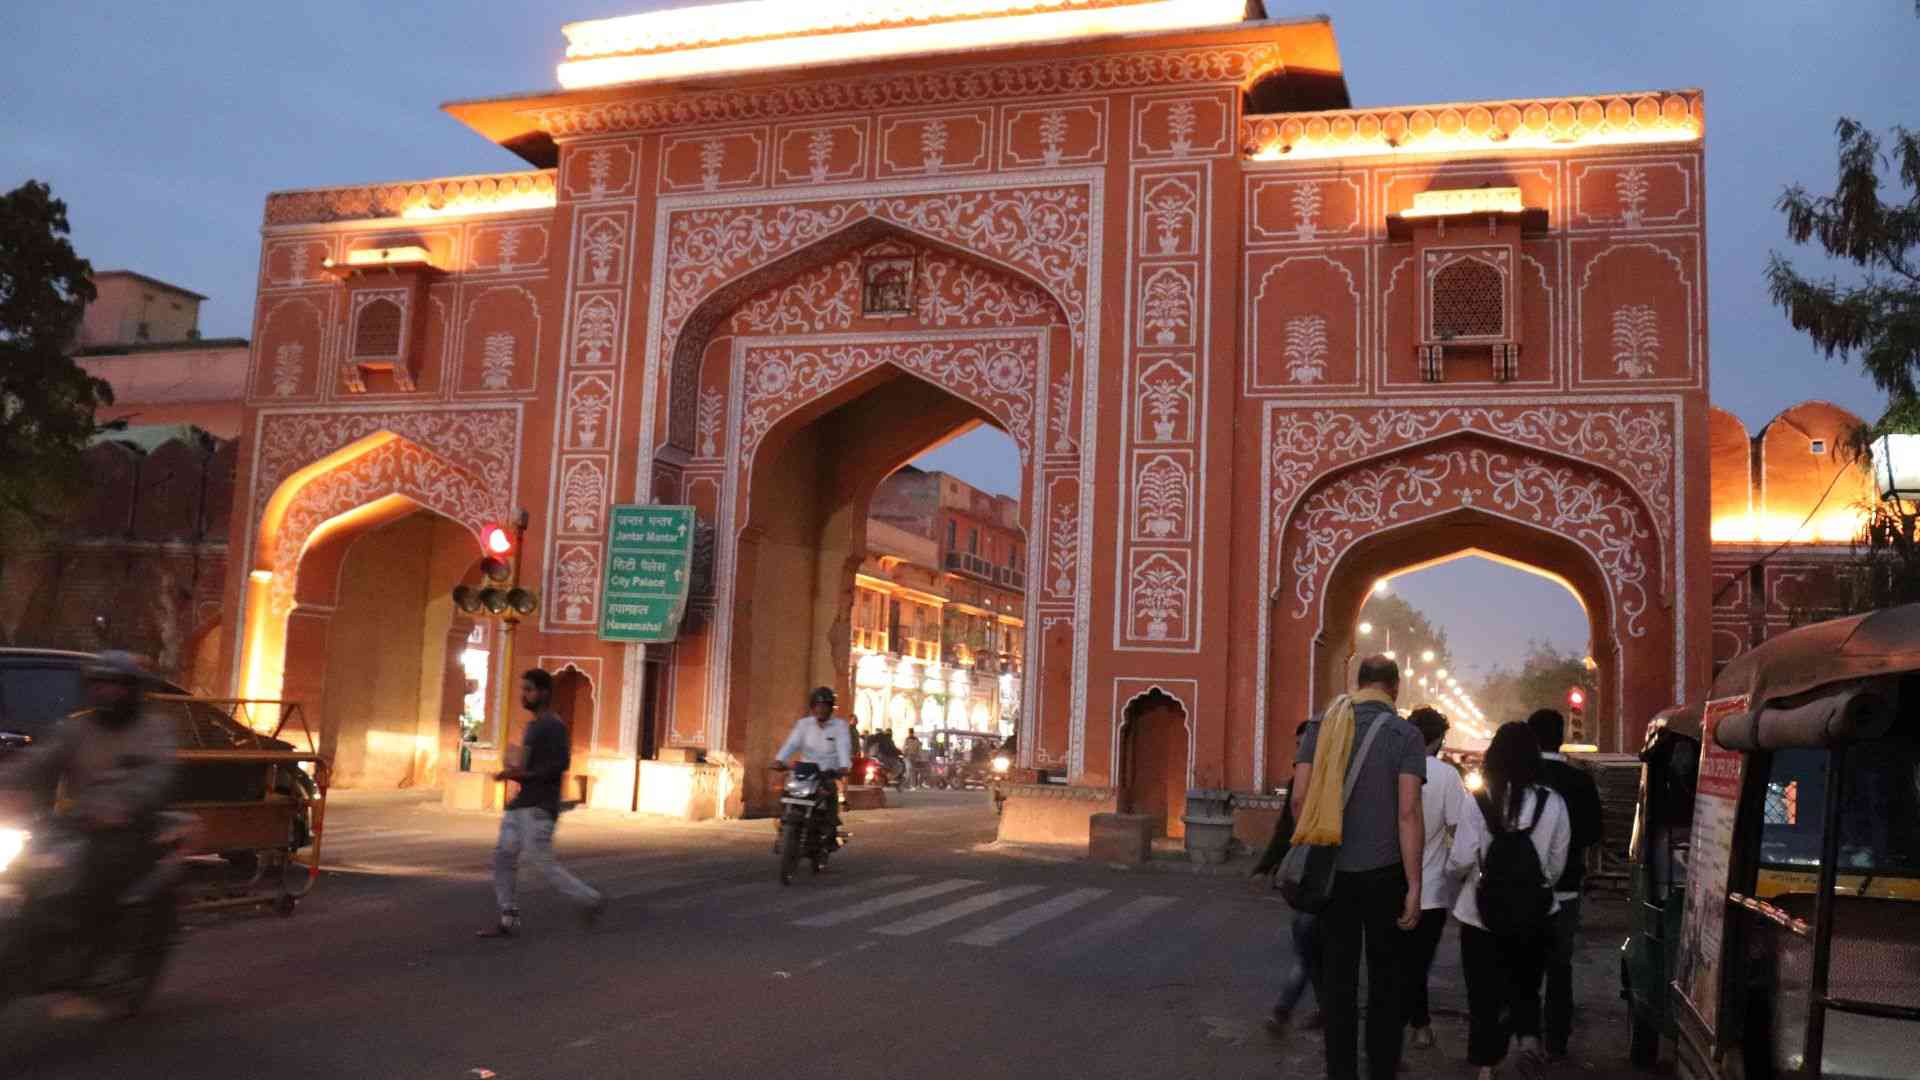 New gate at night in Jaipur